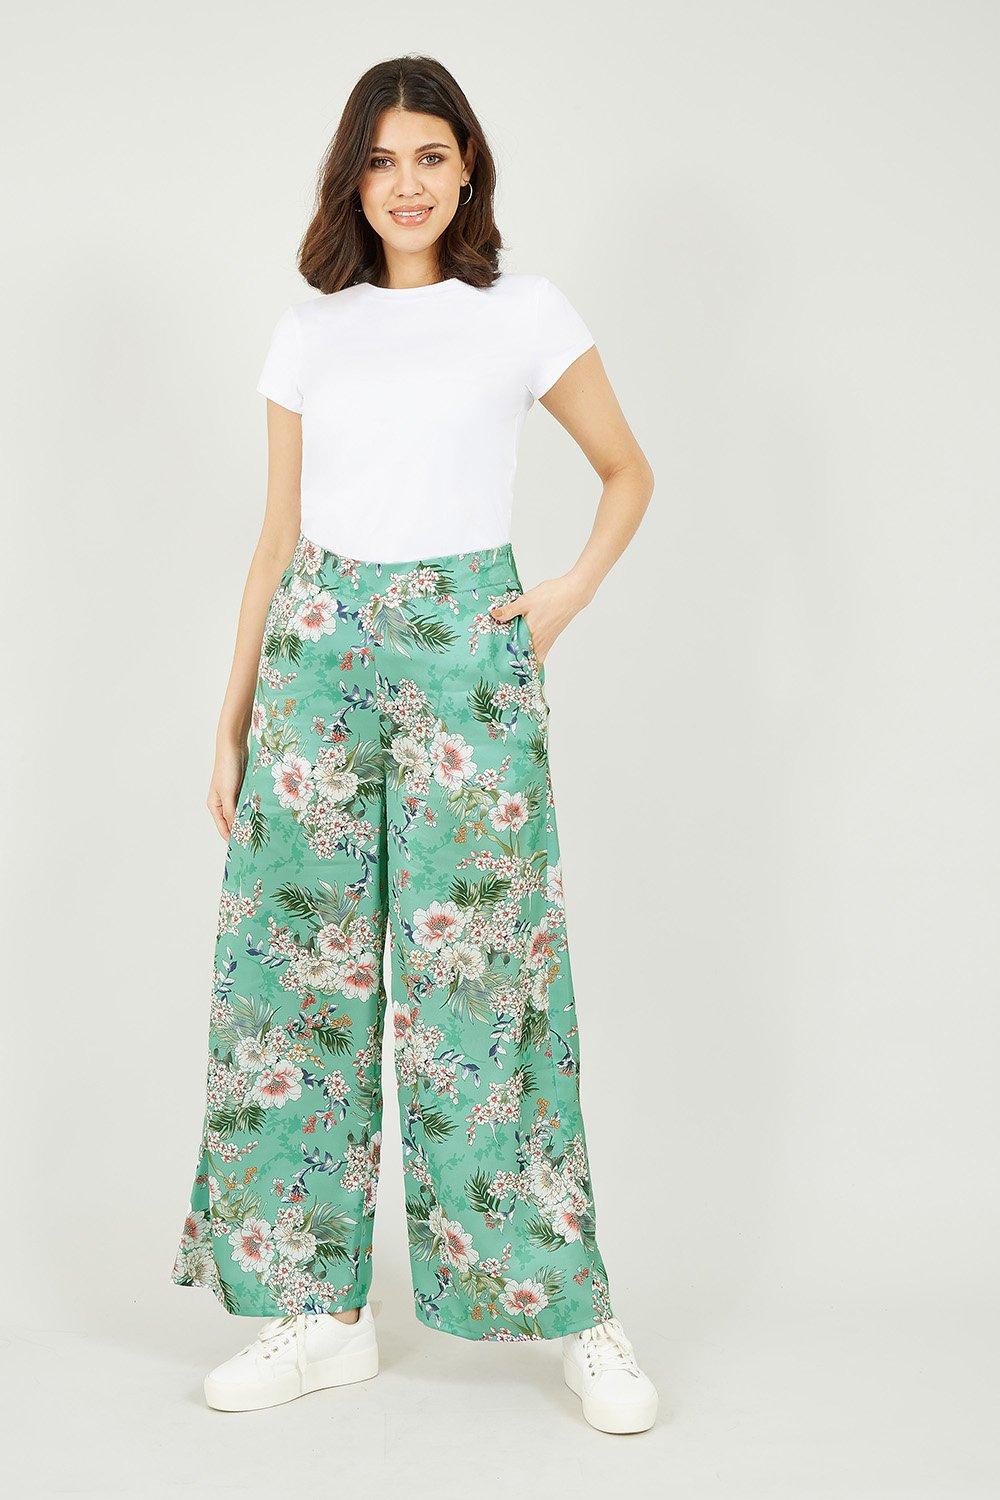 Buy Safari Print Stretchy Trousers Online in India - Etsy